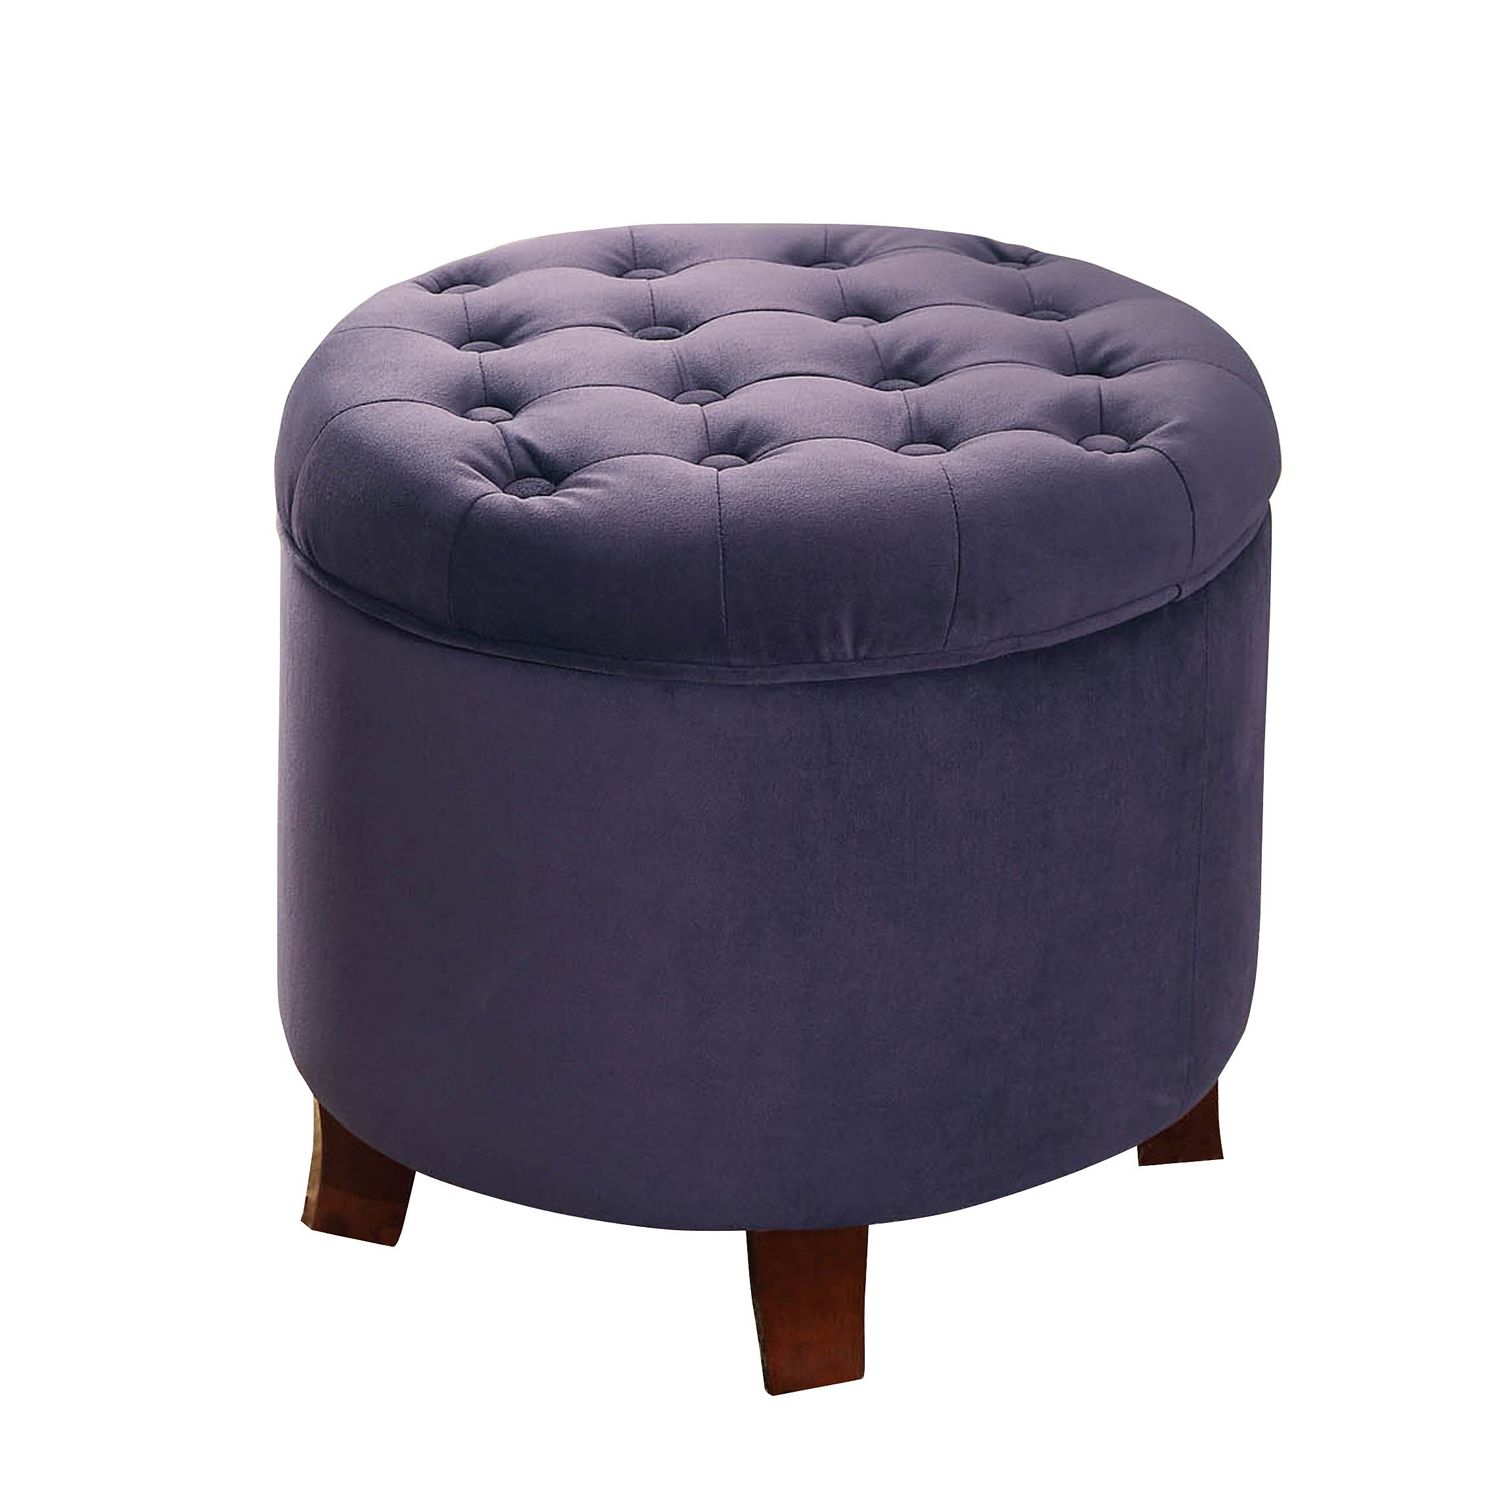 Gray Velvet Tufted Storage Ottomans Pertaining To Most Current Purple Velvet Tufted Round Storage Ottoman – Pier1 Imports (View 1 of 10)